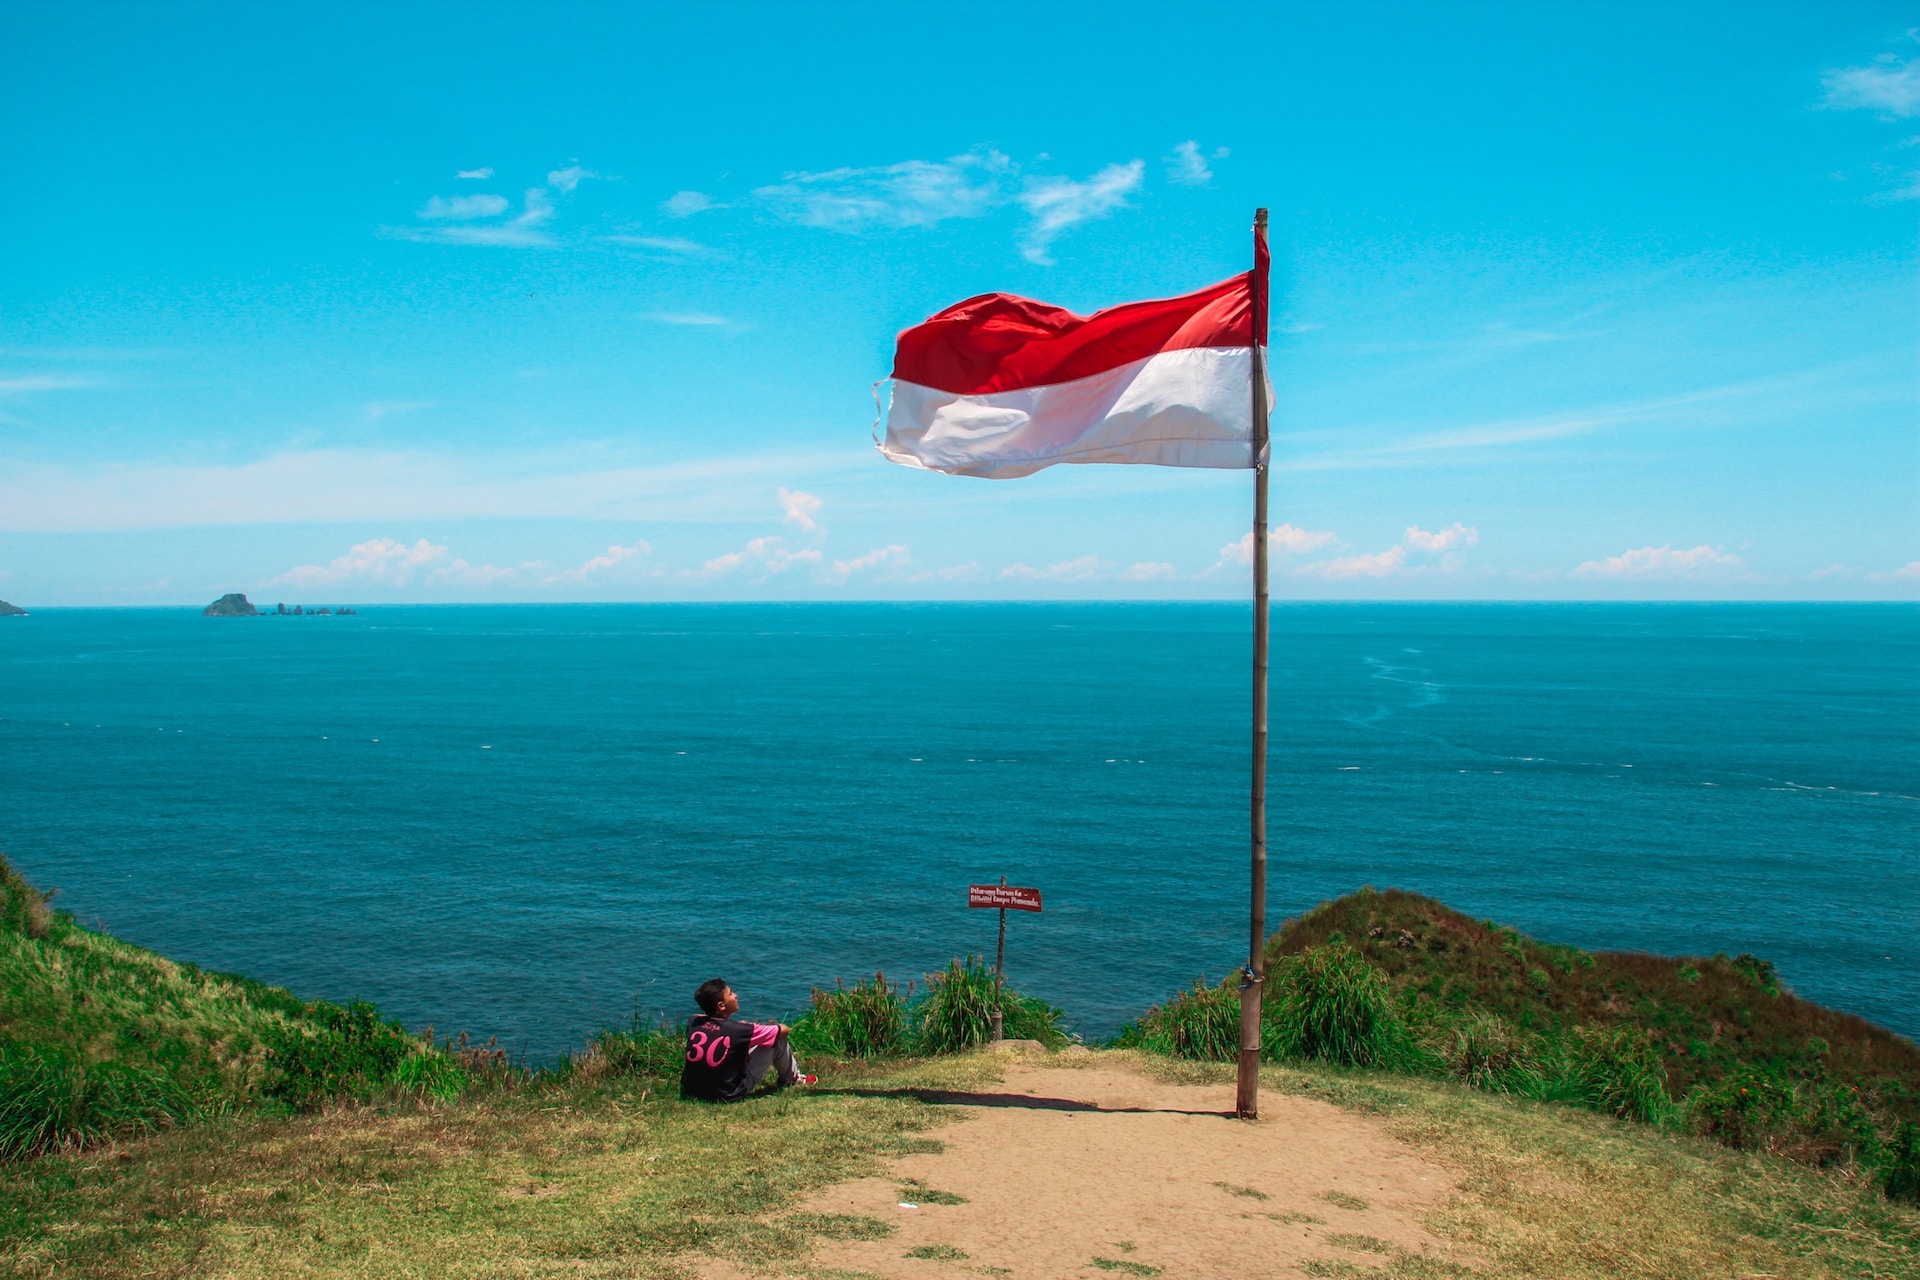 The Indonesian flag flying with the ocean in the background